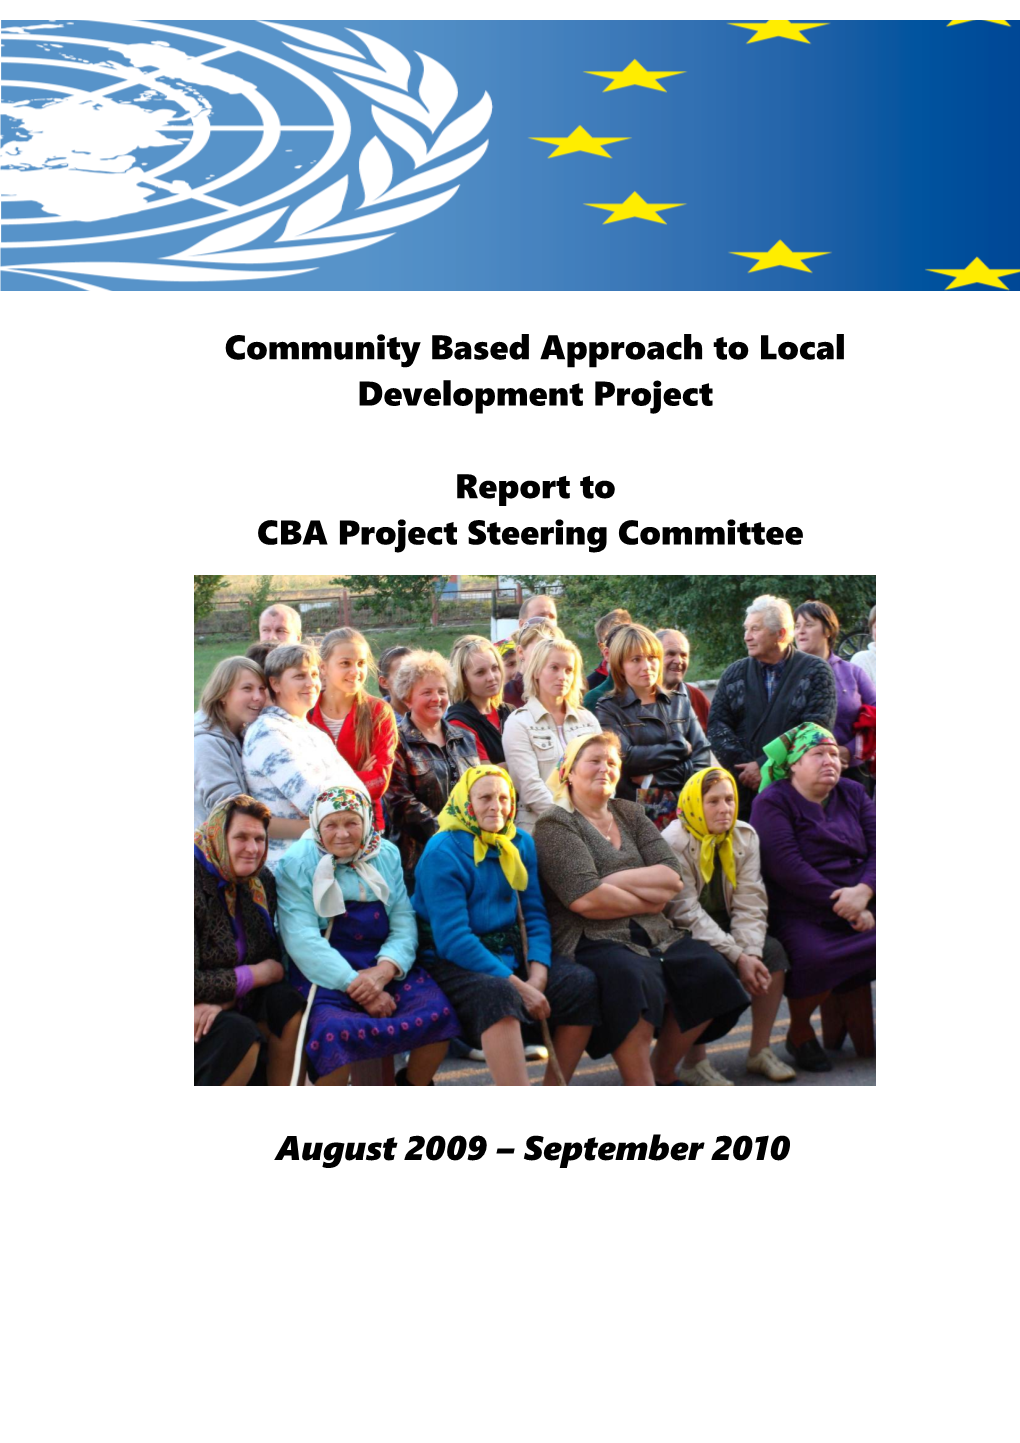 Community Based Approach to Local Development Project